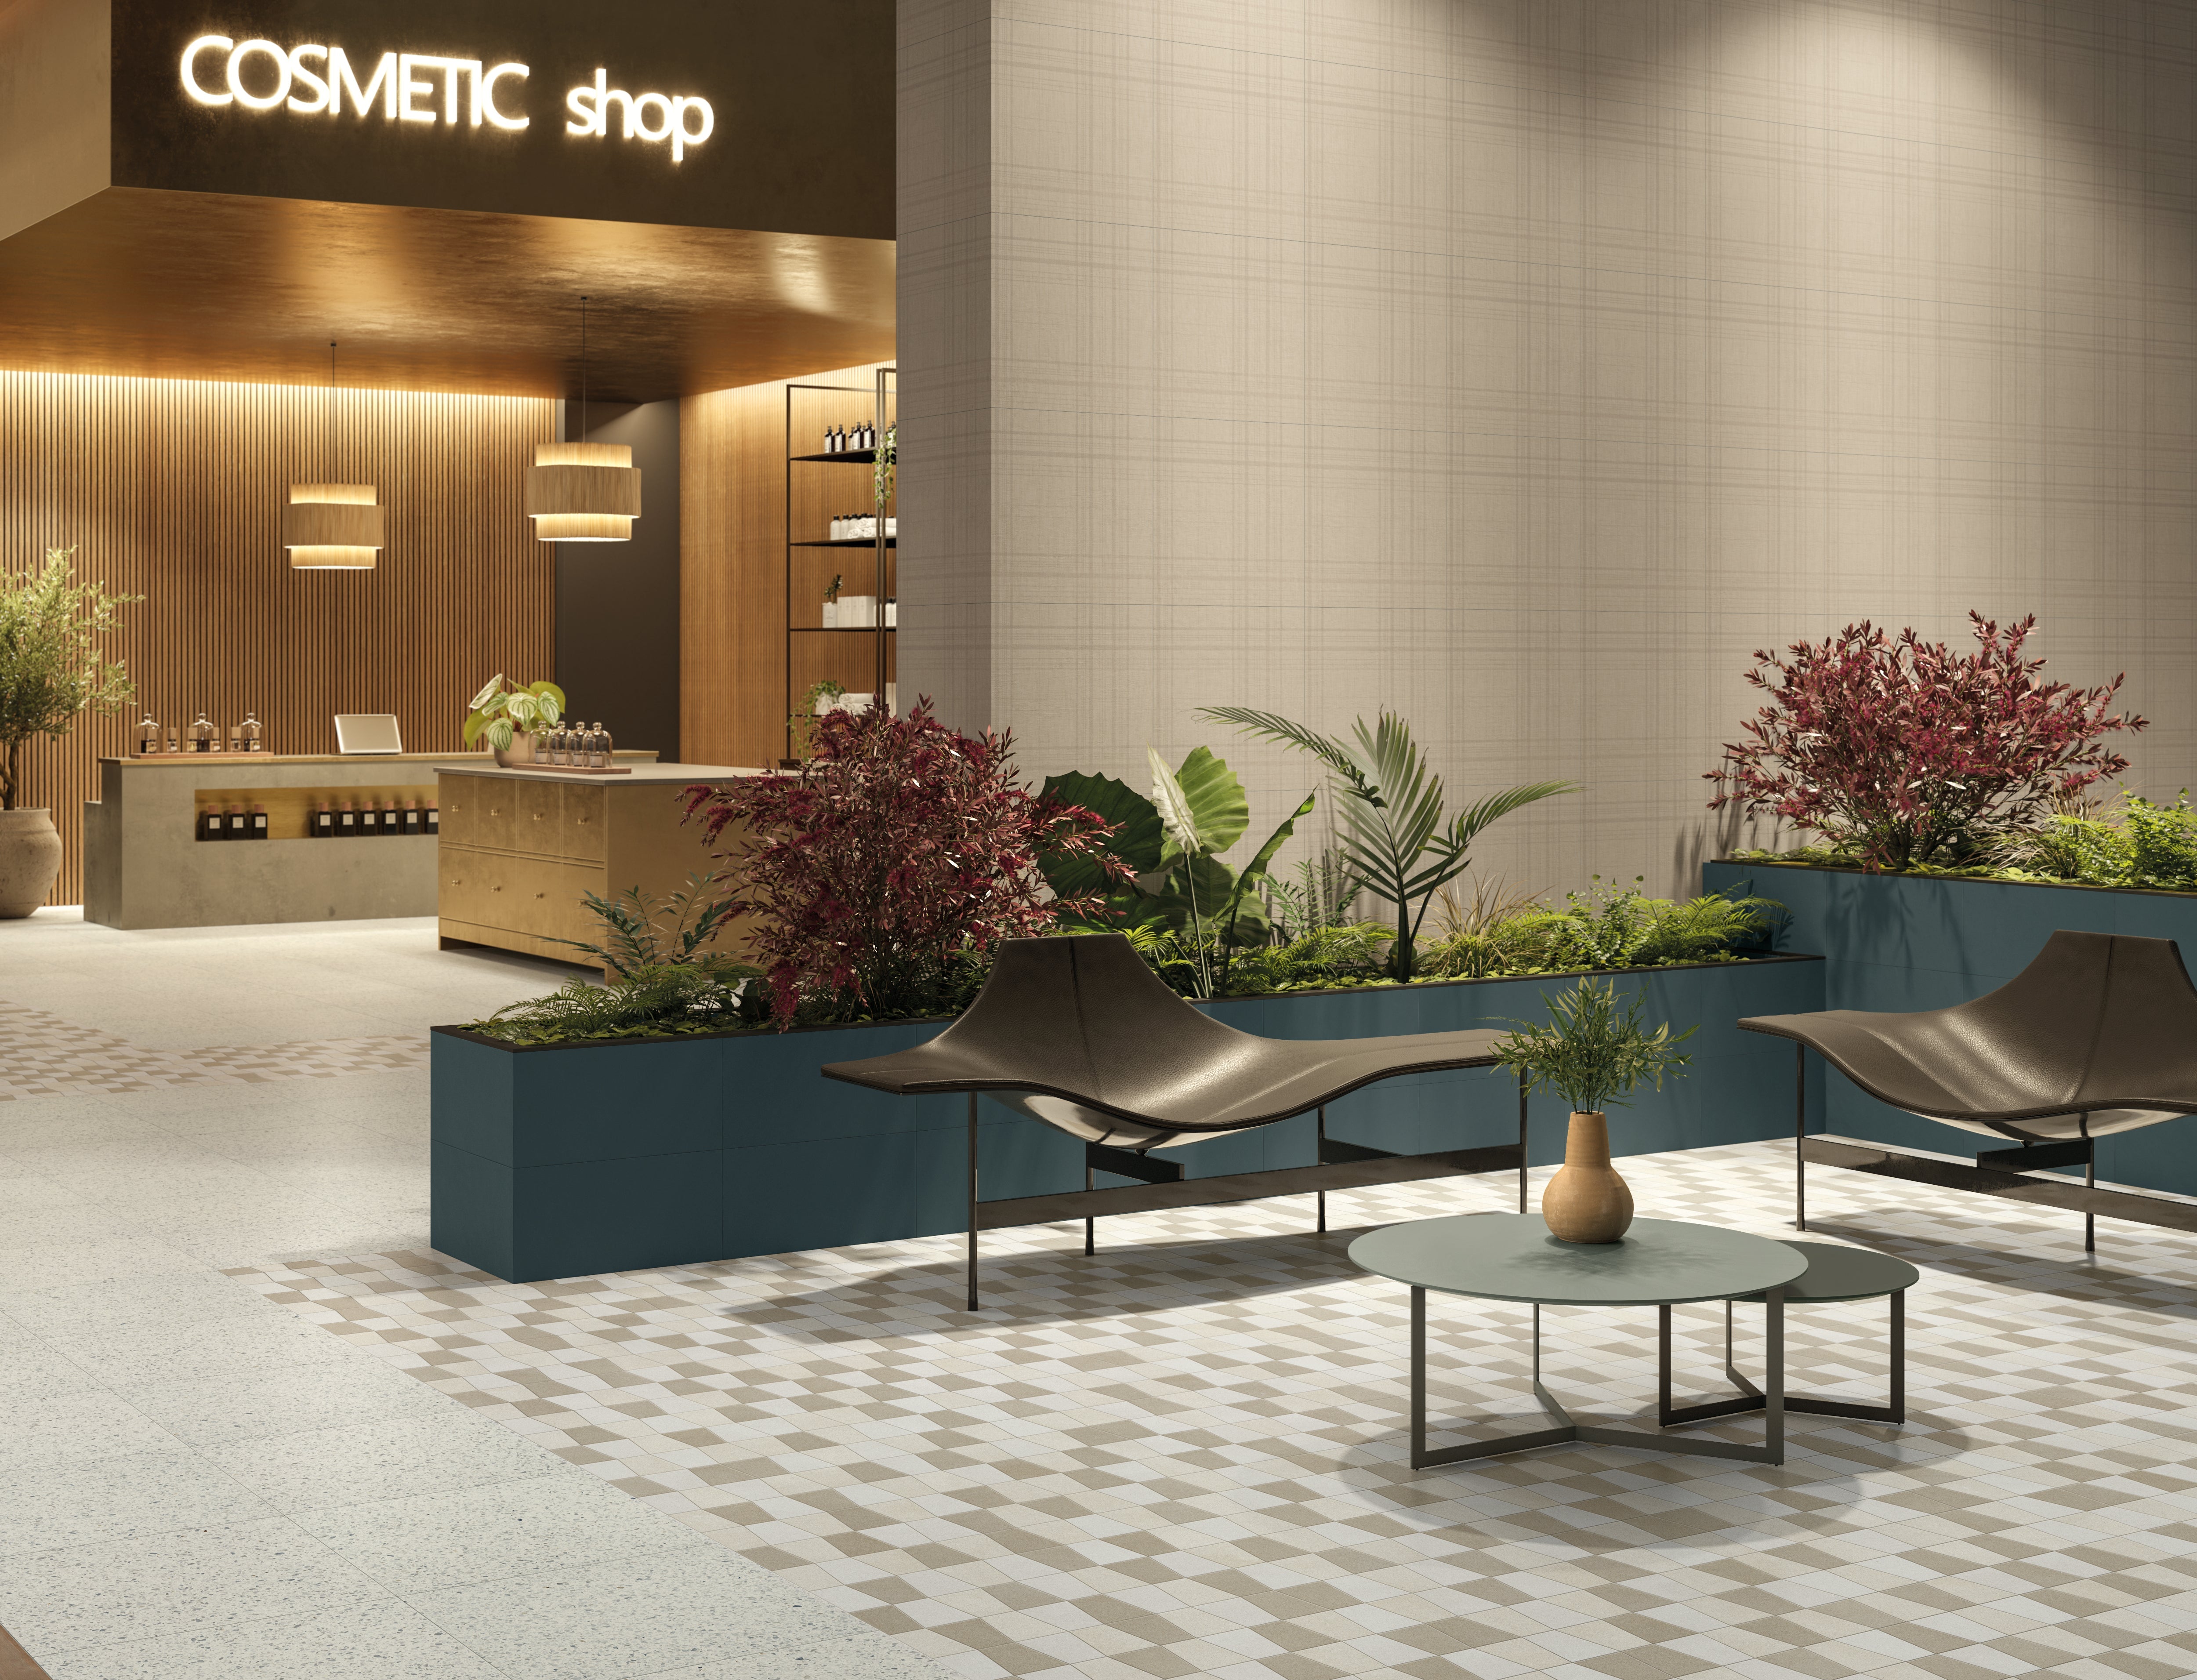 Elite porcelain tile collection in a modern cosmetic shop interior with patterned floor, beige wall tiles, stylish seating, and lush indoor plants.